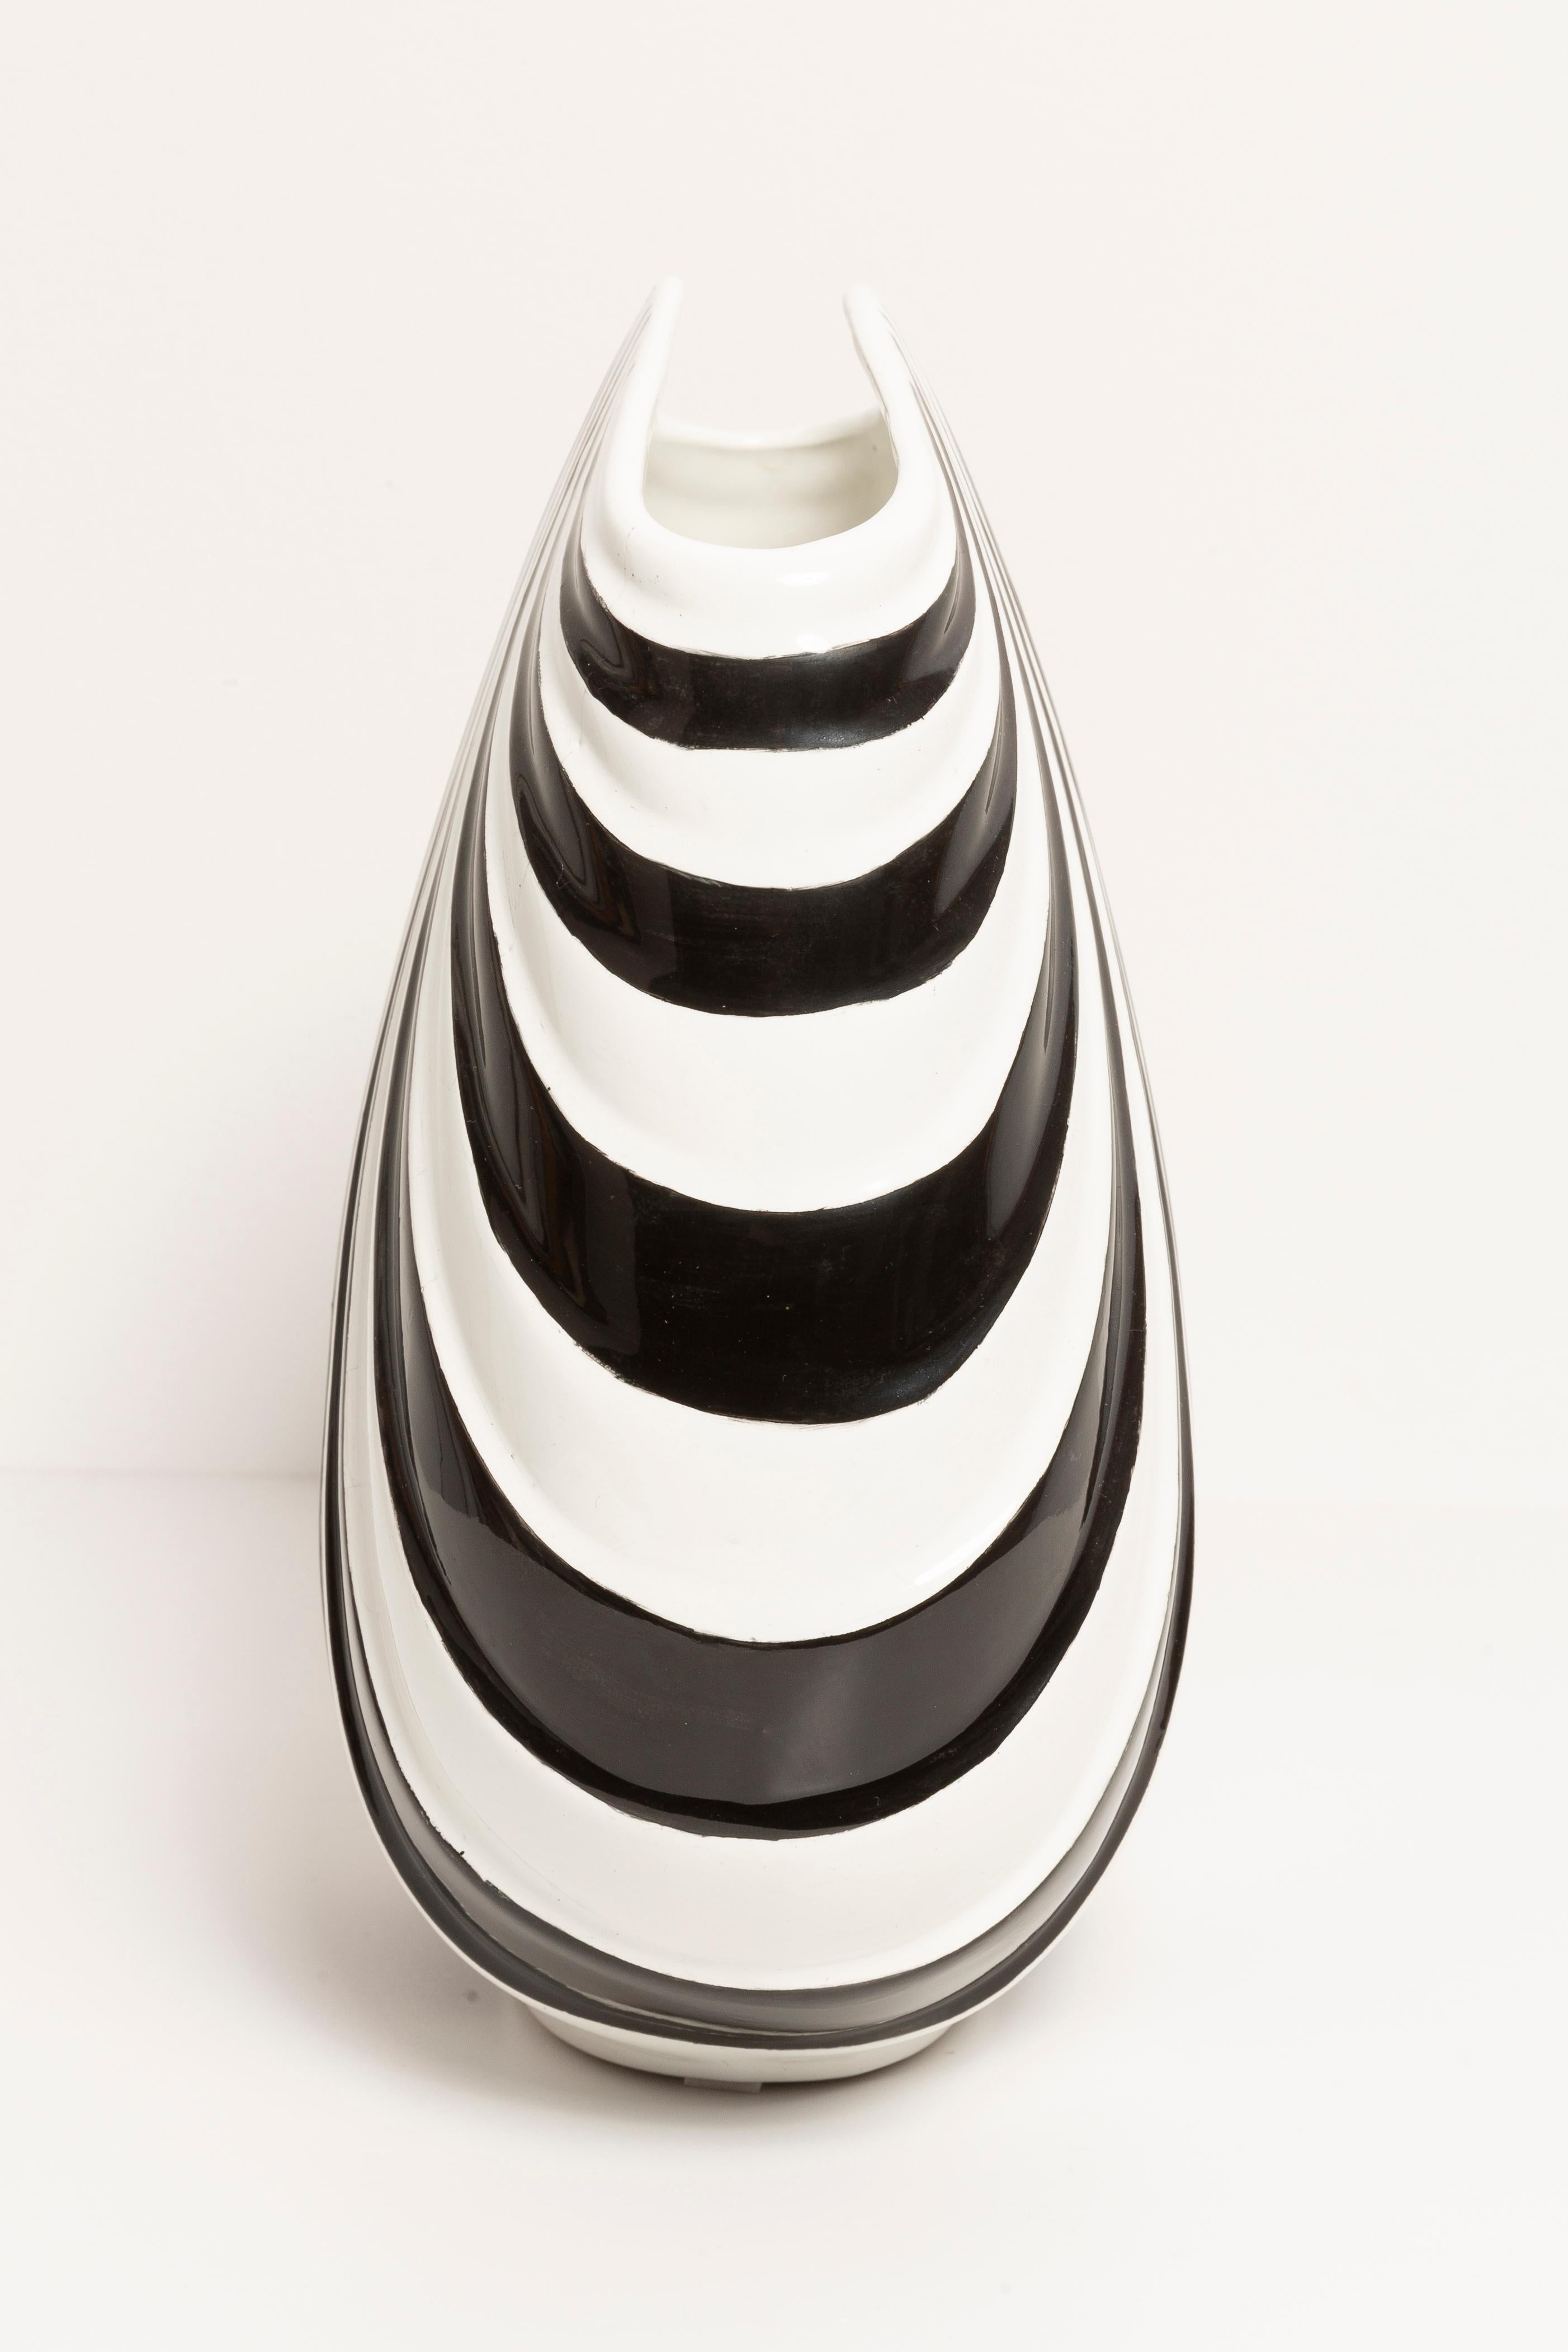 Unique Hand Painted Black and White Vase, 20th Century, Europe, 2000s For Sale 5